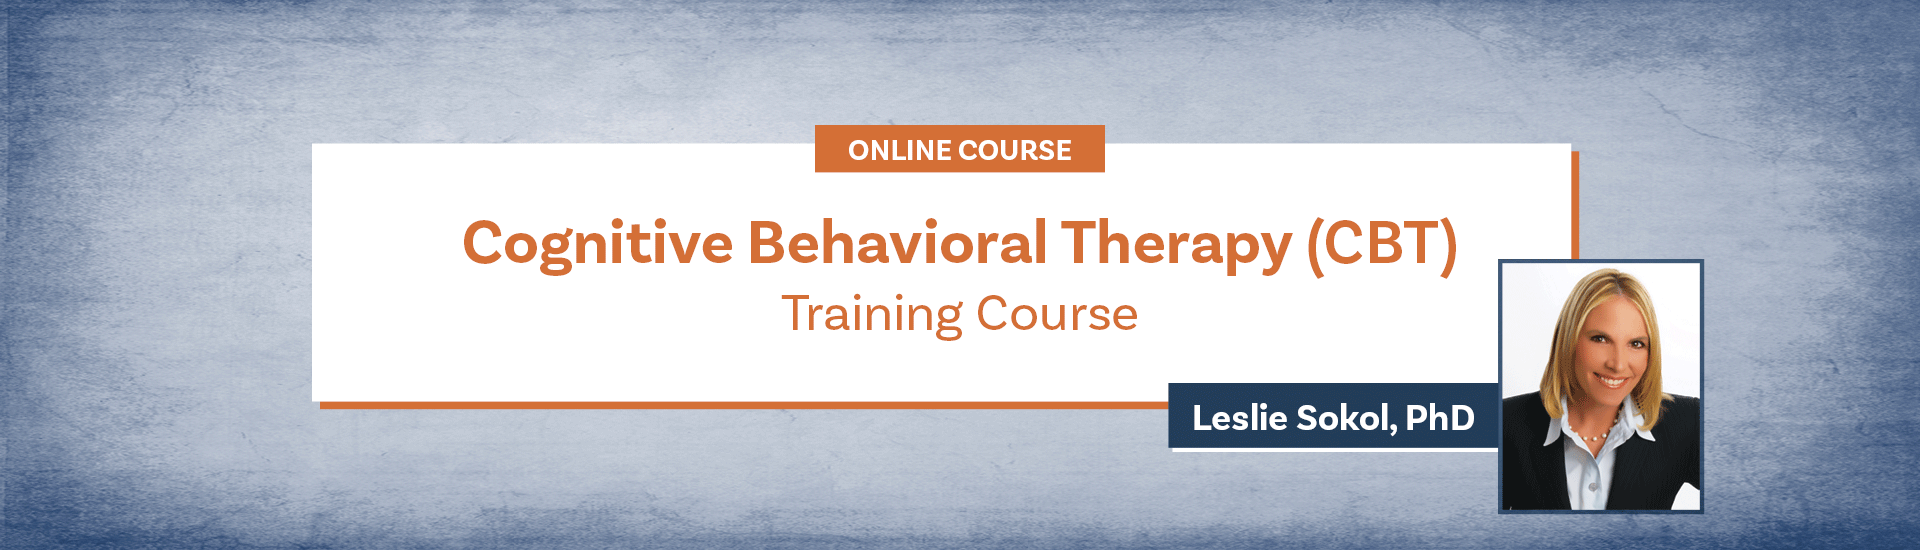 Cognitive Behavioral Therapy (CBT)Training Course